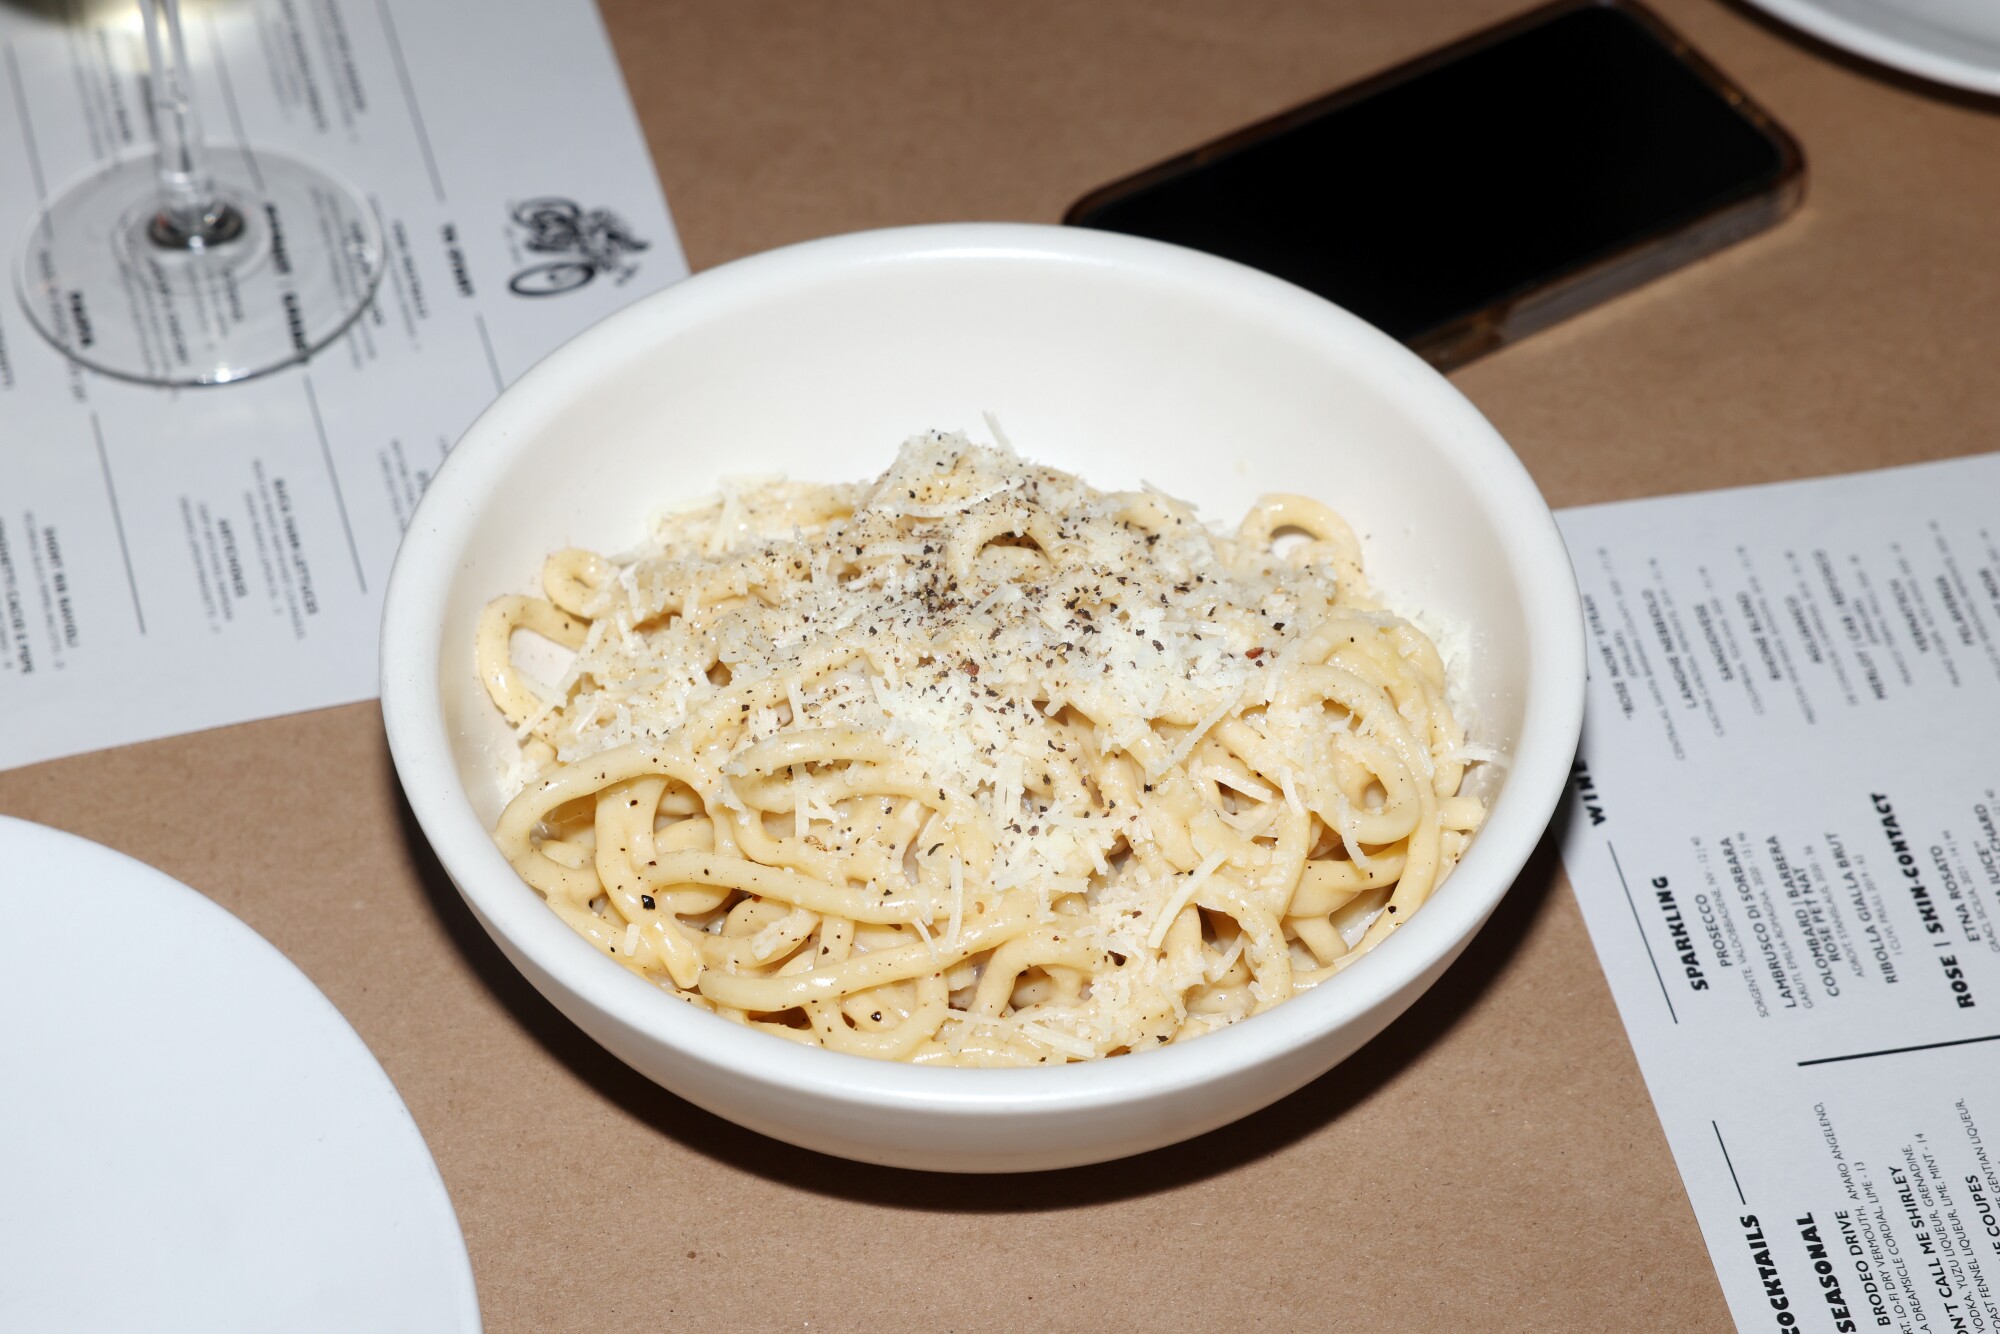 A bowl of pasta sits on a table amid menus, wine glasses and plates.